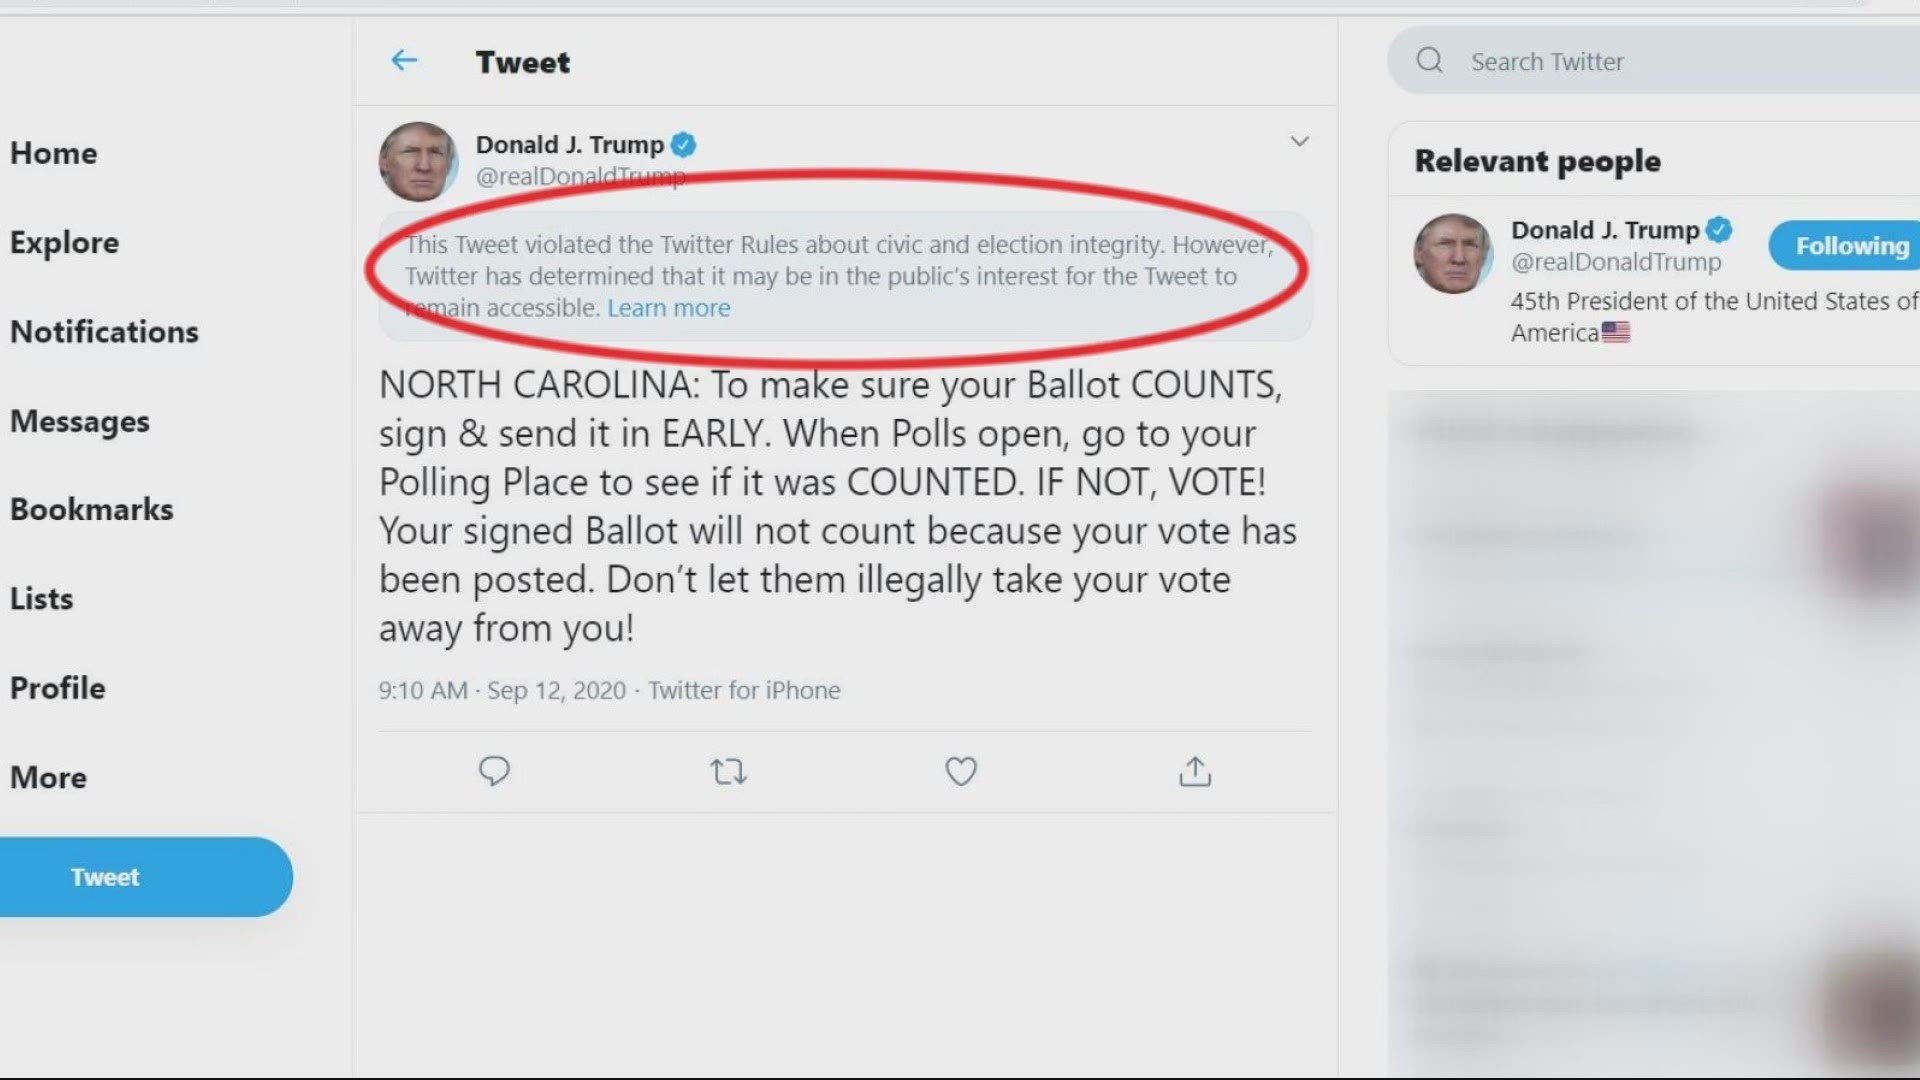 President Trump is telling North Carolina residents for a second time to show up at the polls to see if the vote was counted.